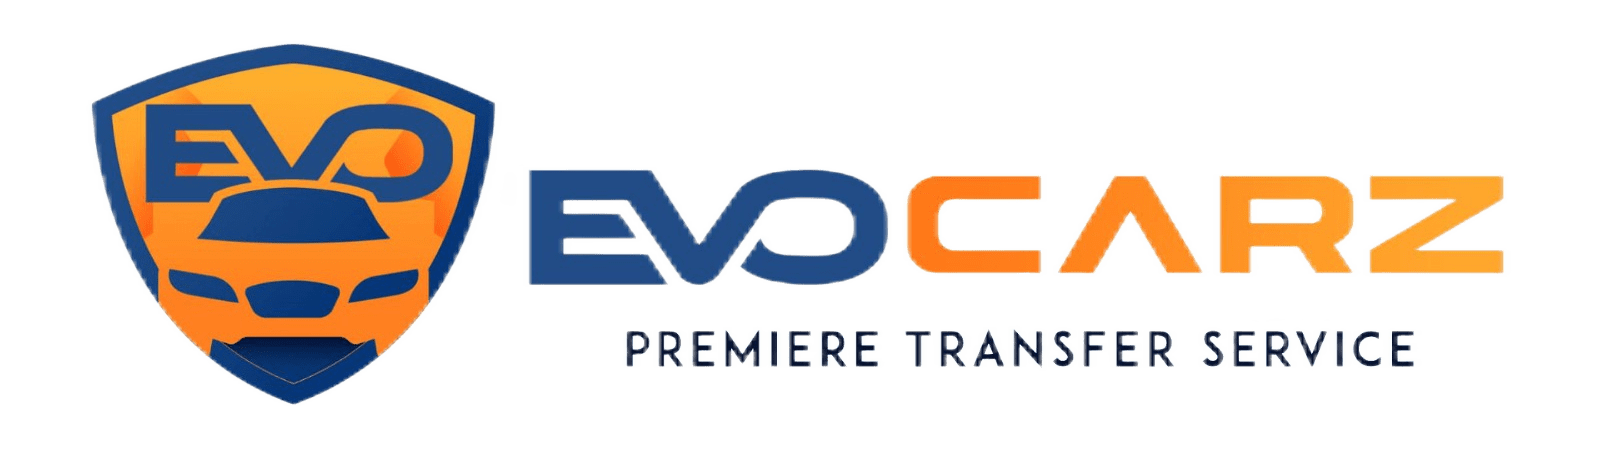 Evo Carz | Luton Airport Taxi Local And Private Hire | Chauffeur services